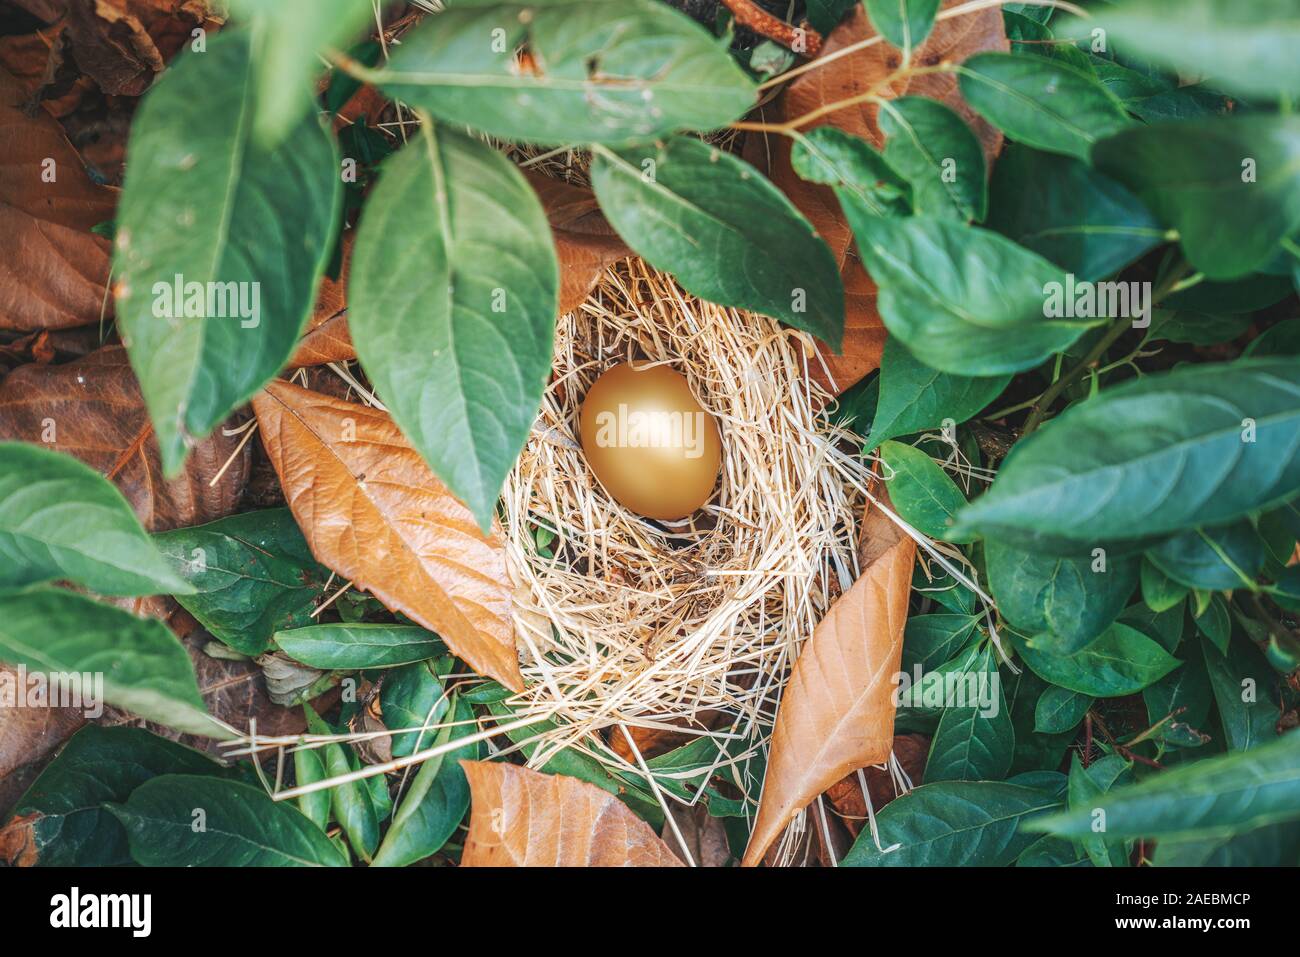 Unique and valuable golden egg with nest on green and dried leaves. Stock Photo